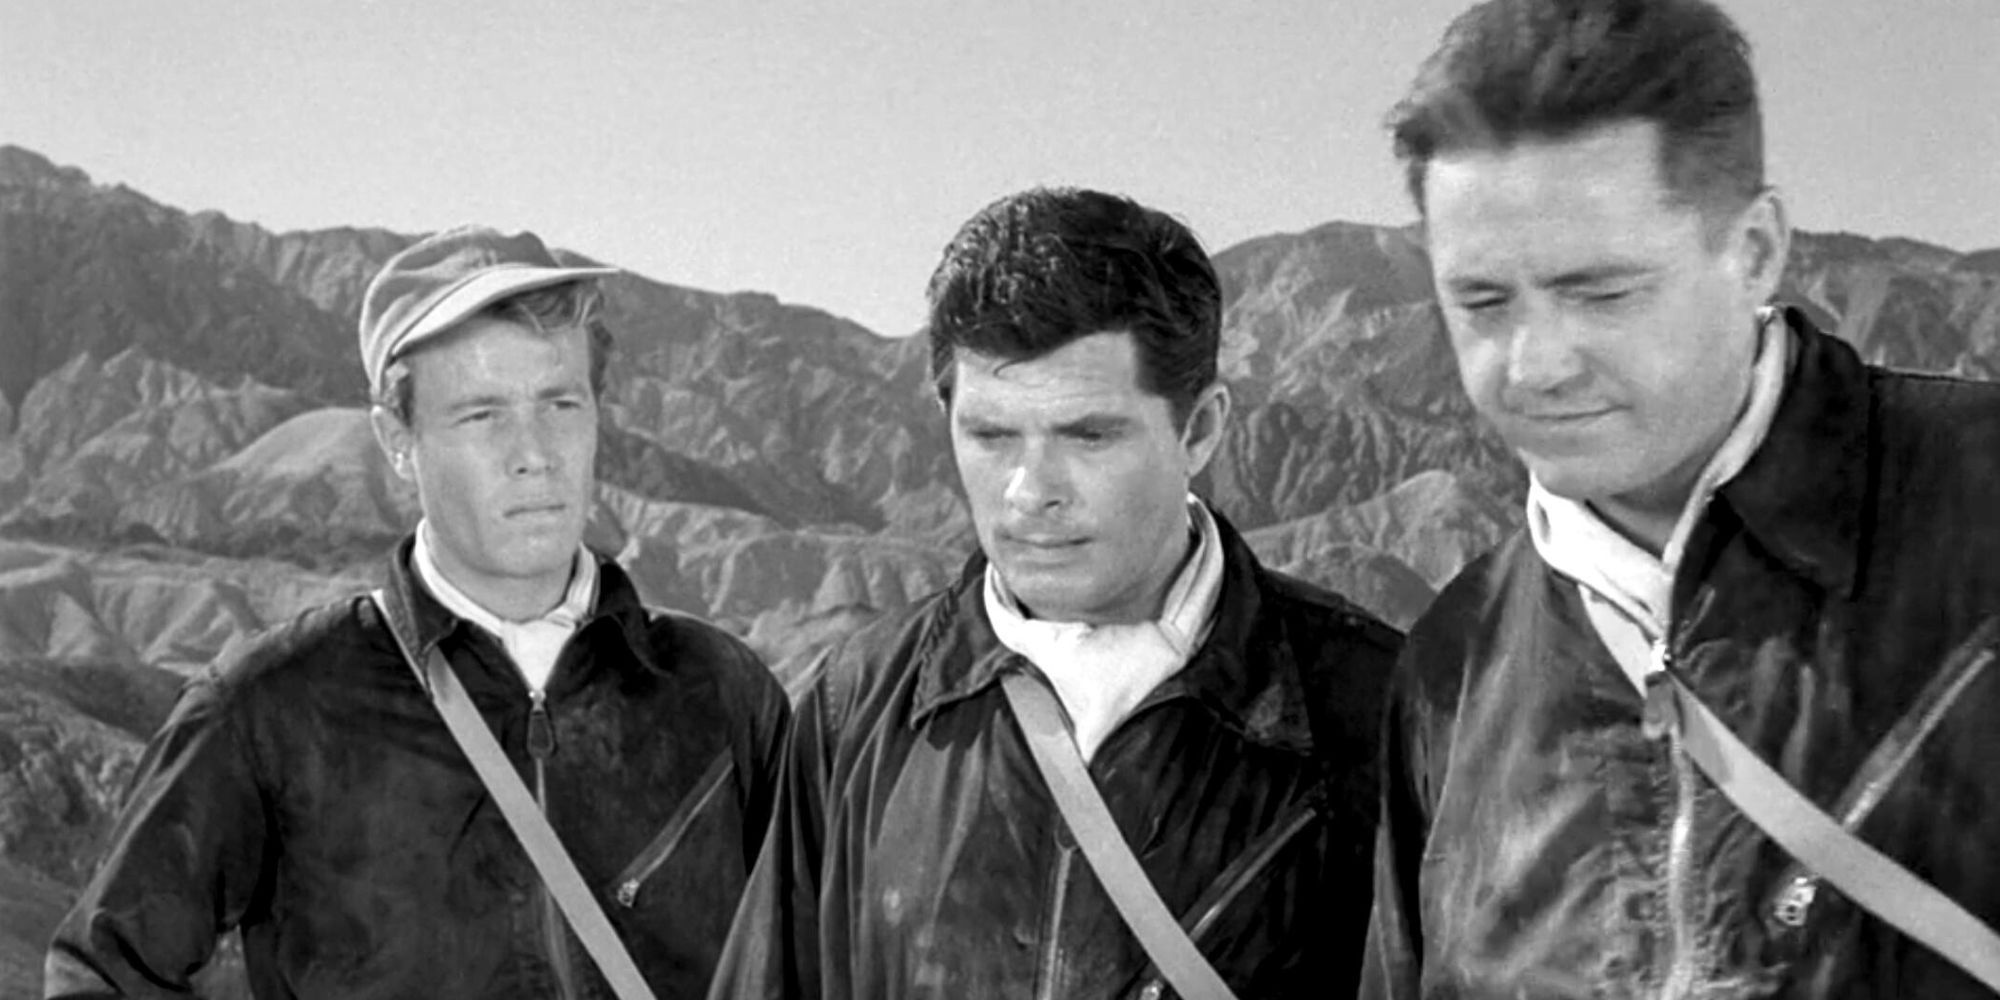 Edward Binns, Dewey Martin and Ted Otis standing next to each other in The Twilight Zone